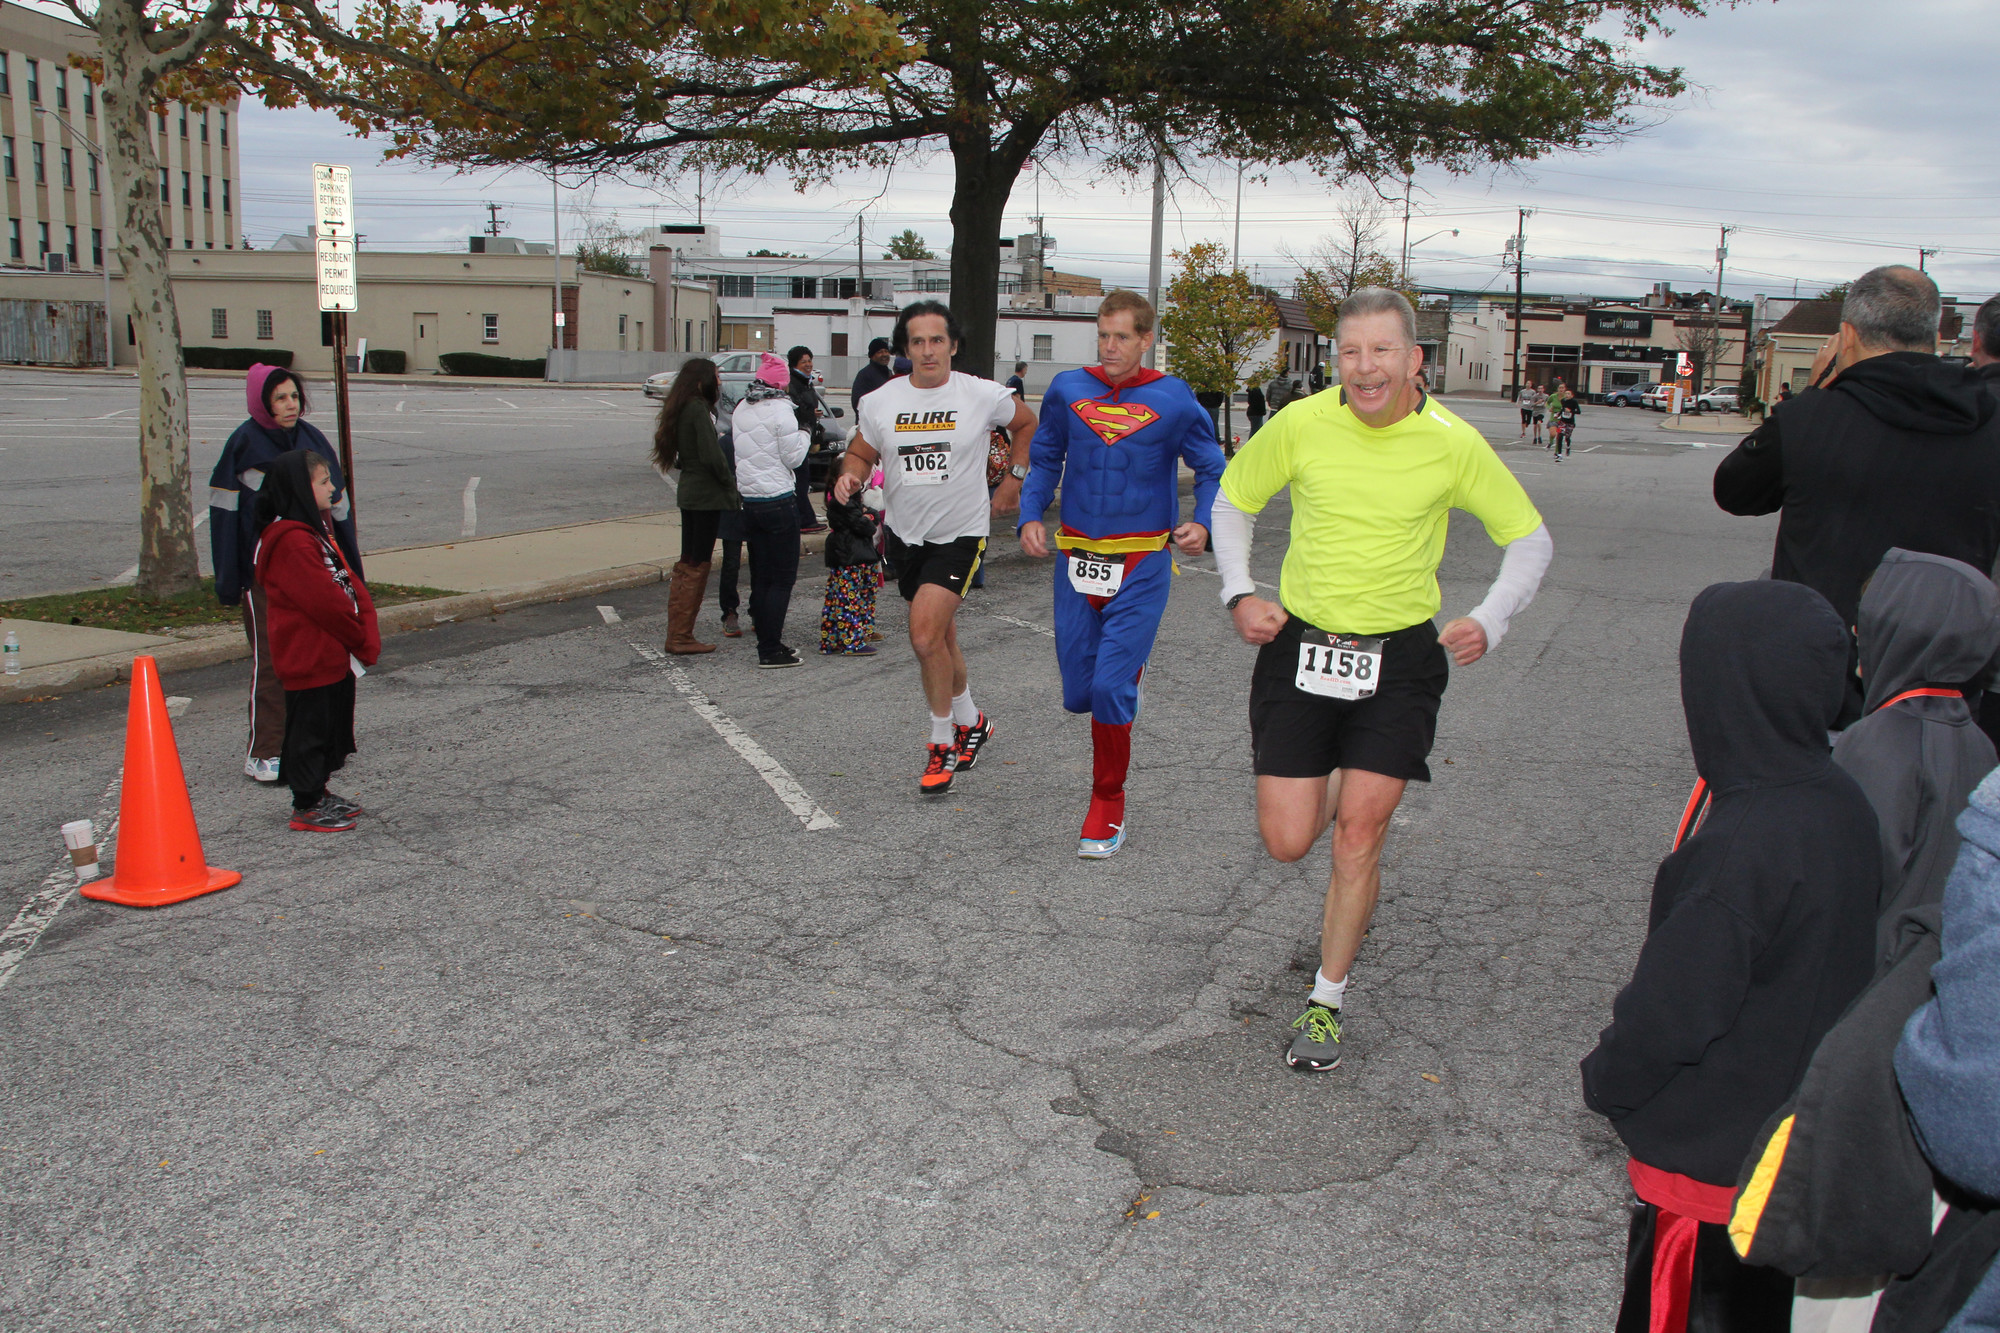 Some of the runners wore regular racing attire, and others came in costume.